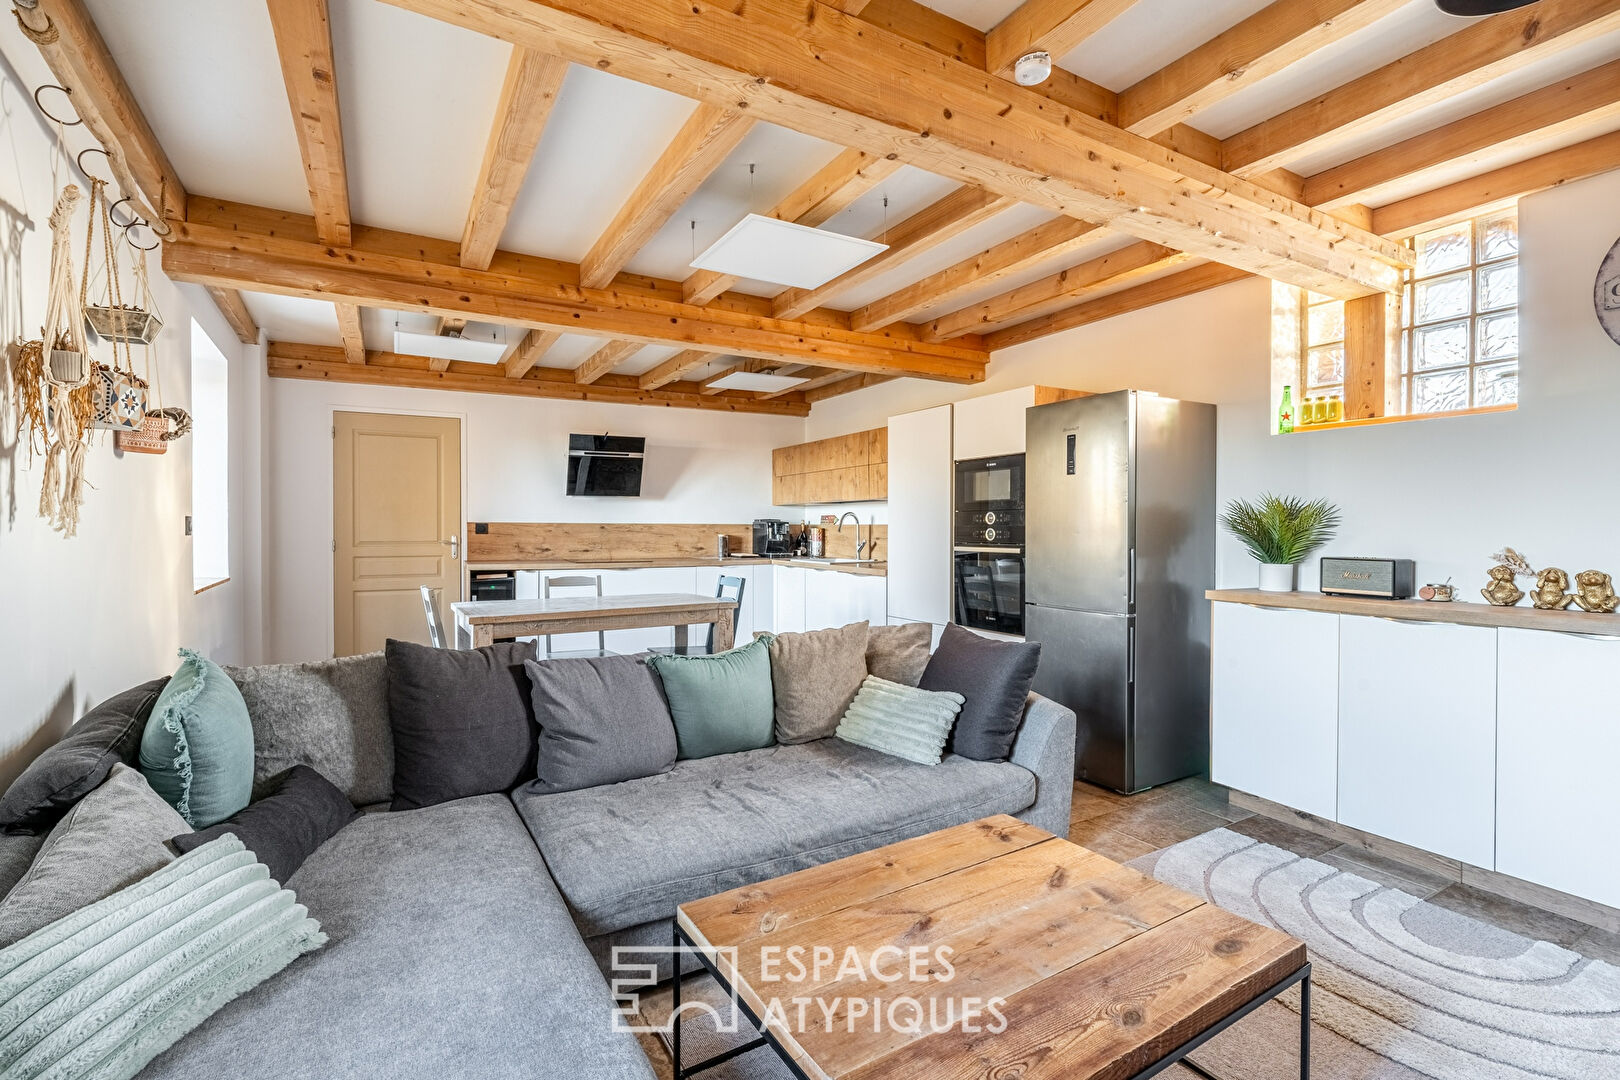 Charming house with a cozy atmosphere 30 minutes from the center of Lyon